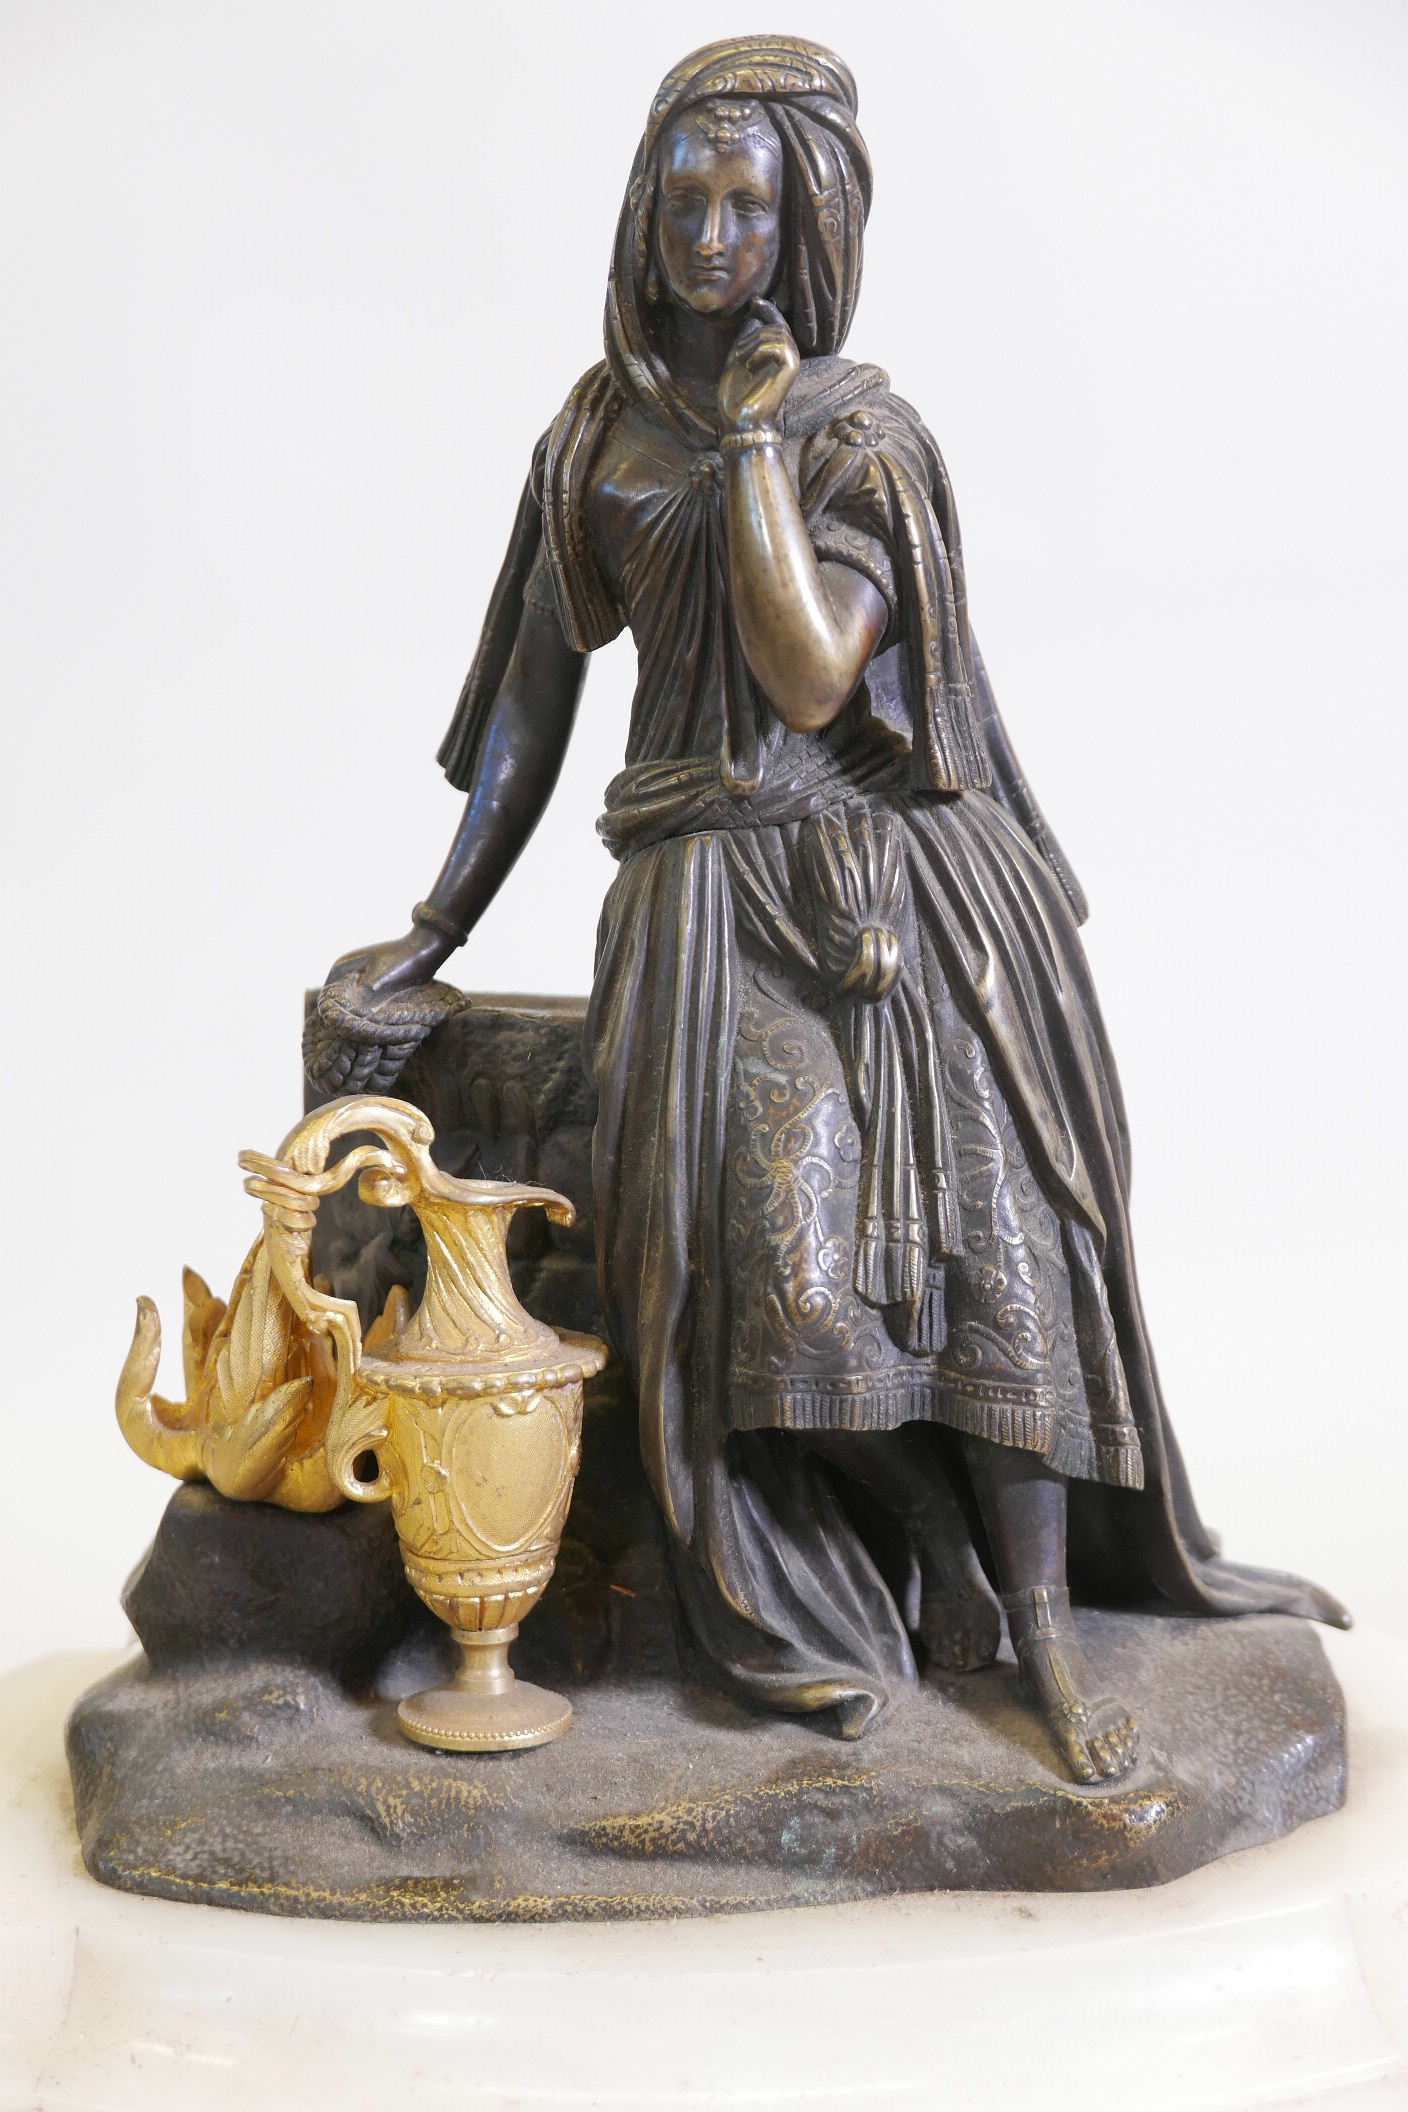 A C19th French onyx mantel clock, with a bronze and ormolu figure of an Ottoman woman with ewer, the - Image 3 of 5